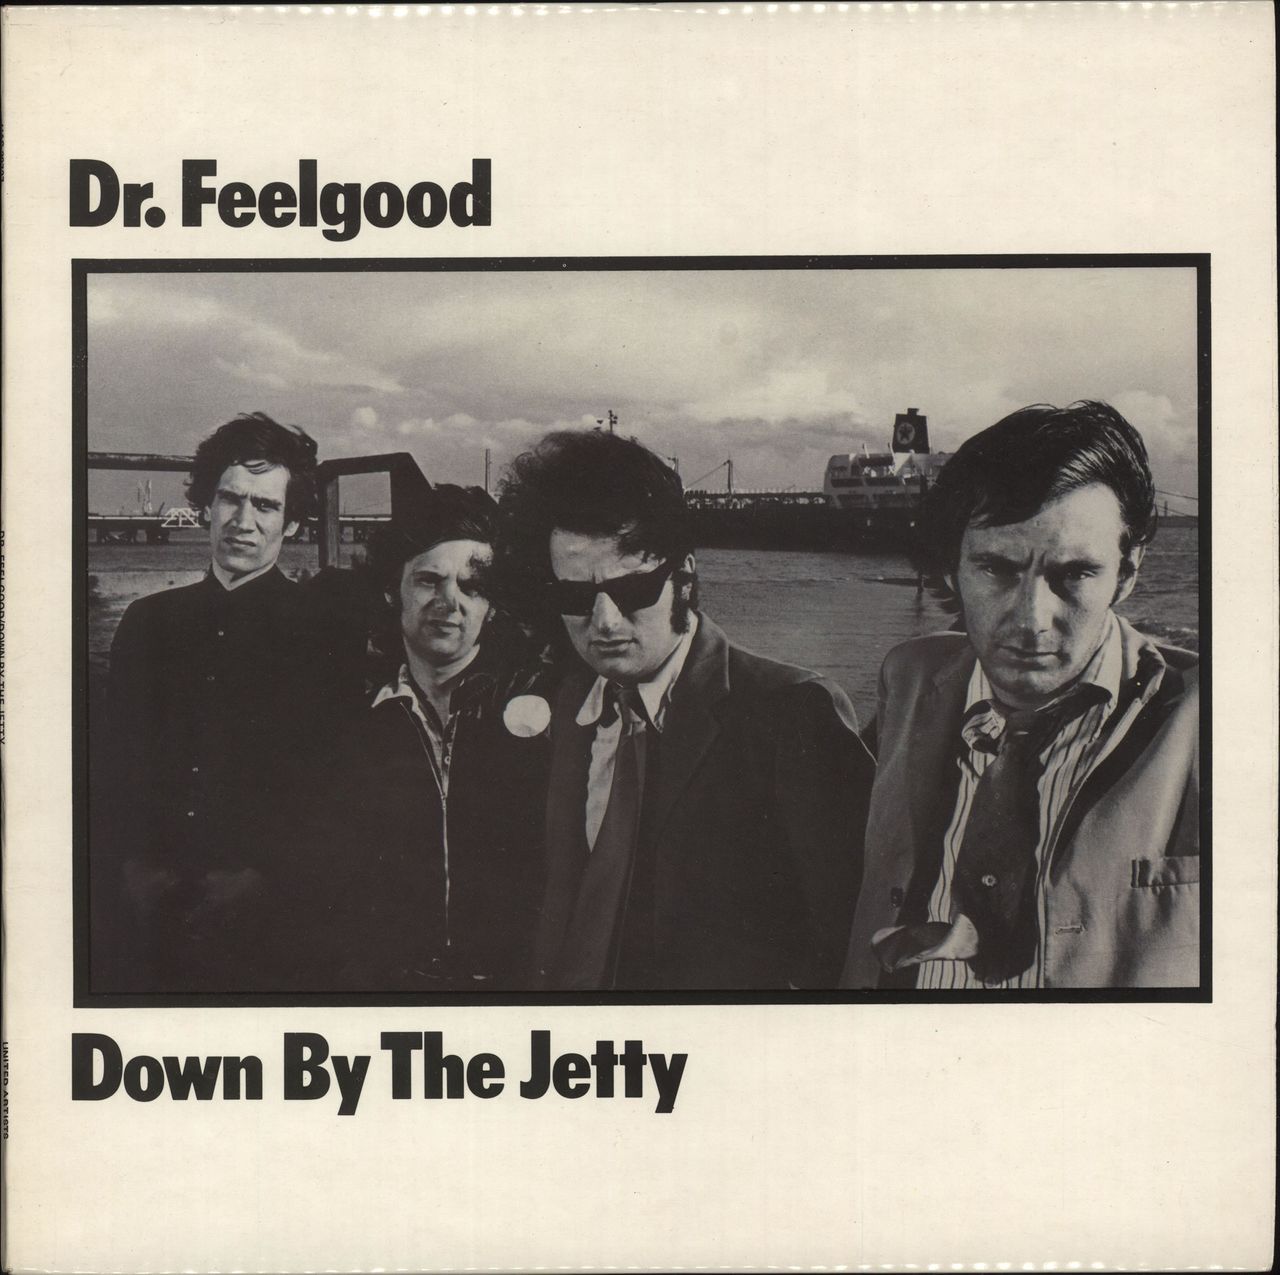 DR. FEELGOOD, DOWN BY THE JETTY - 洋楽